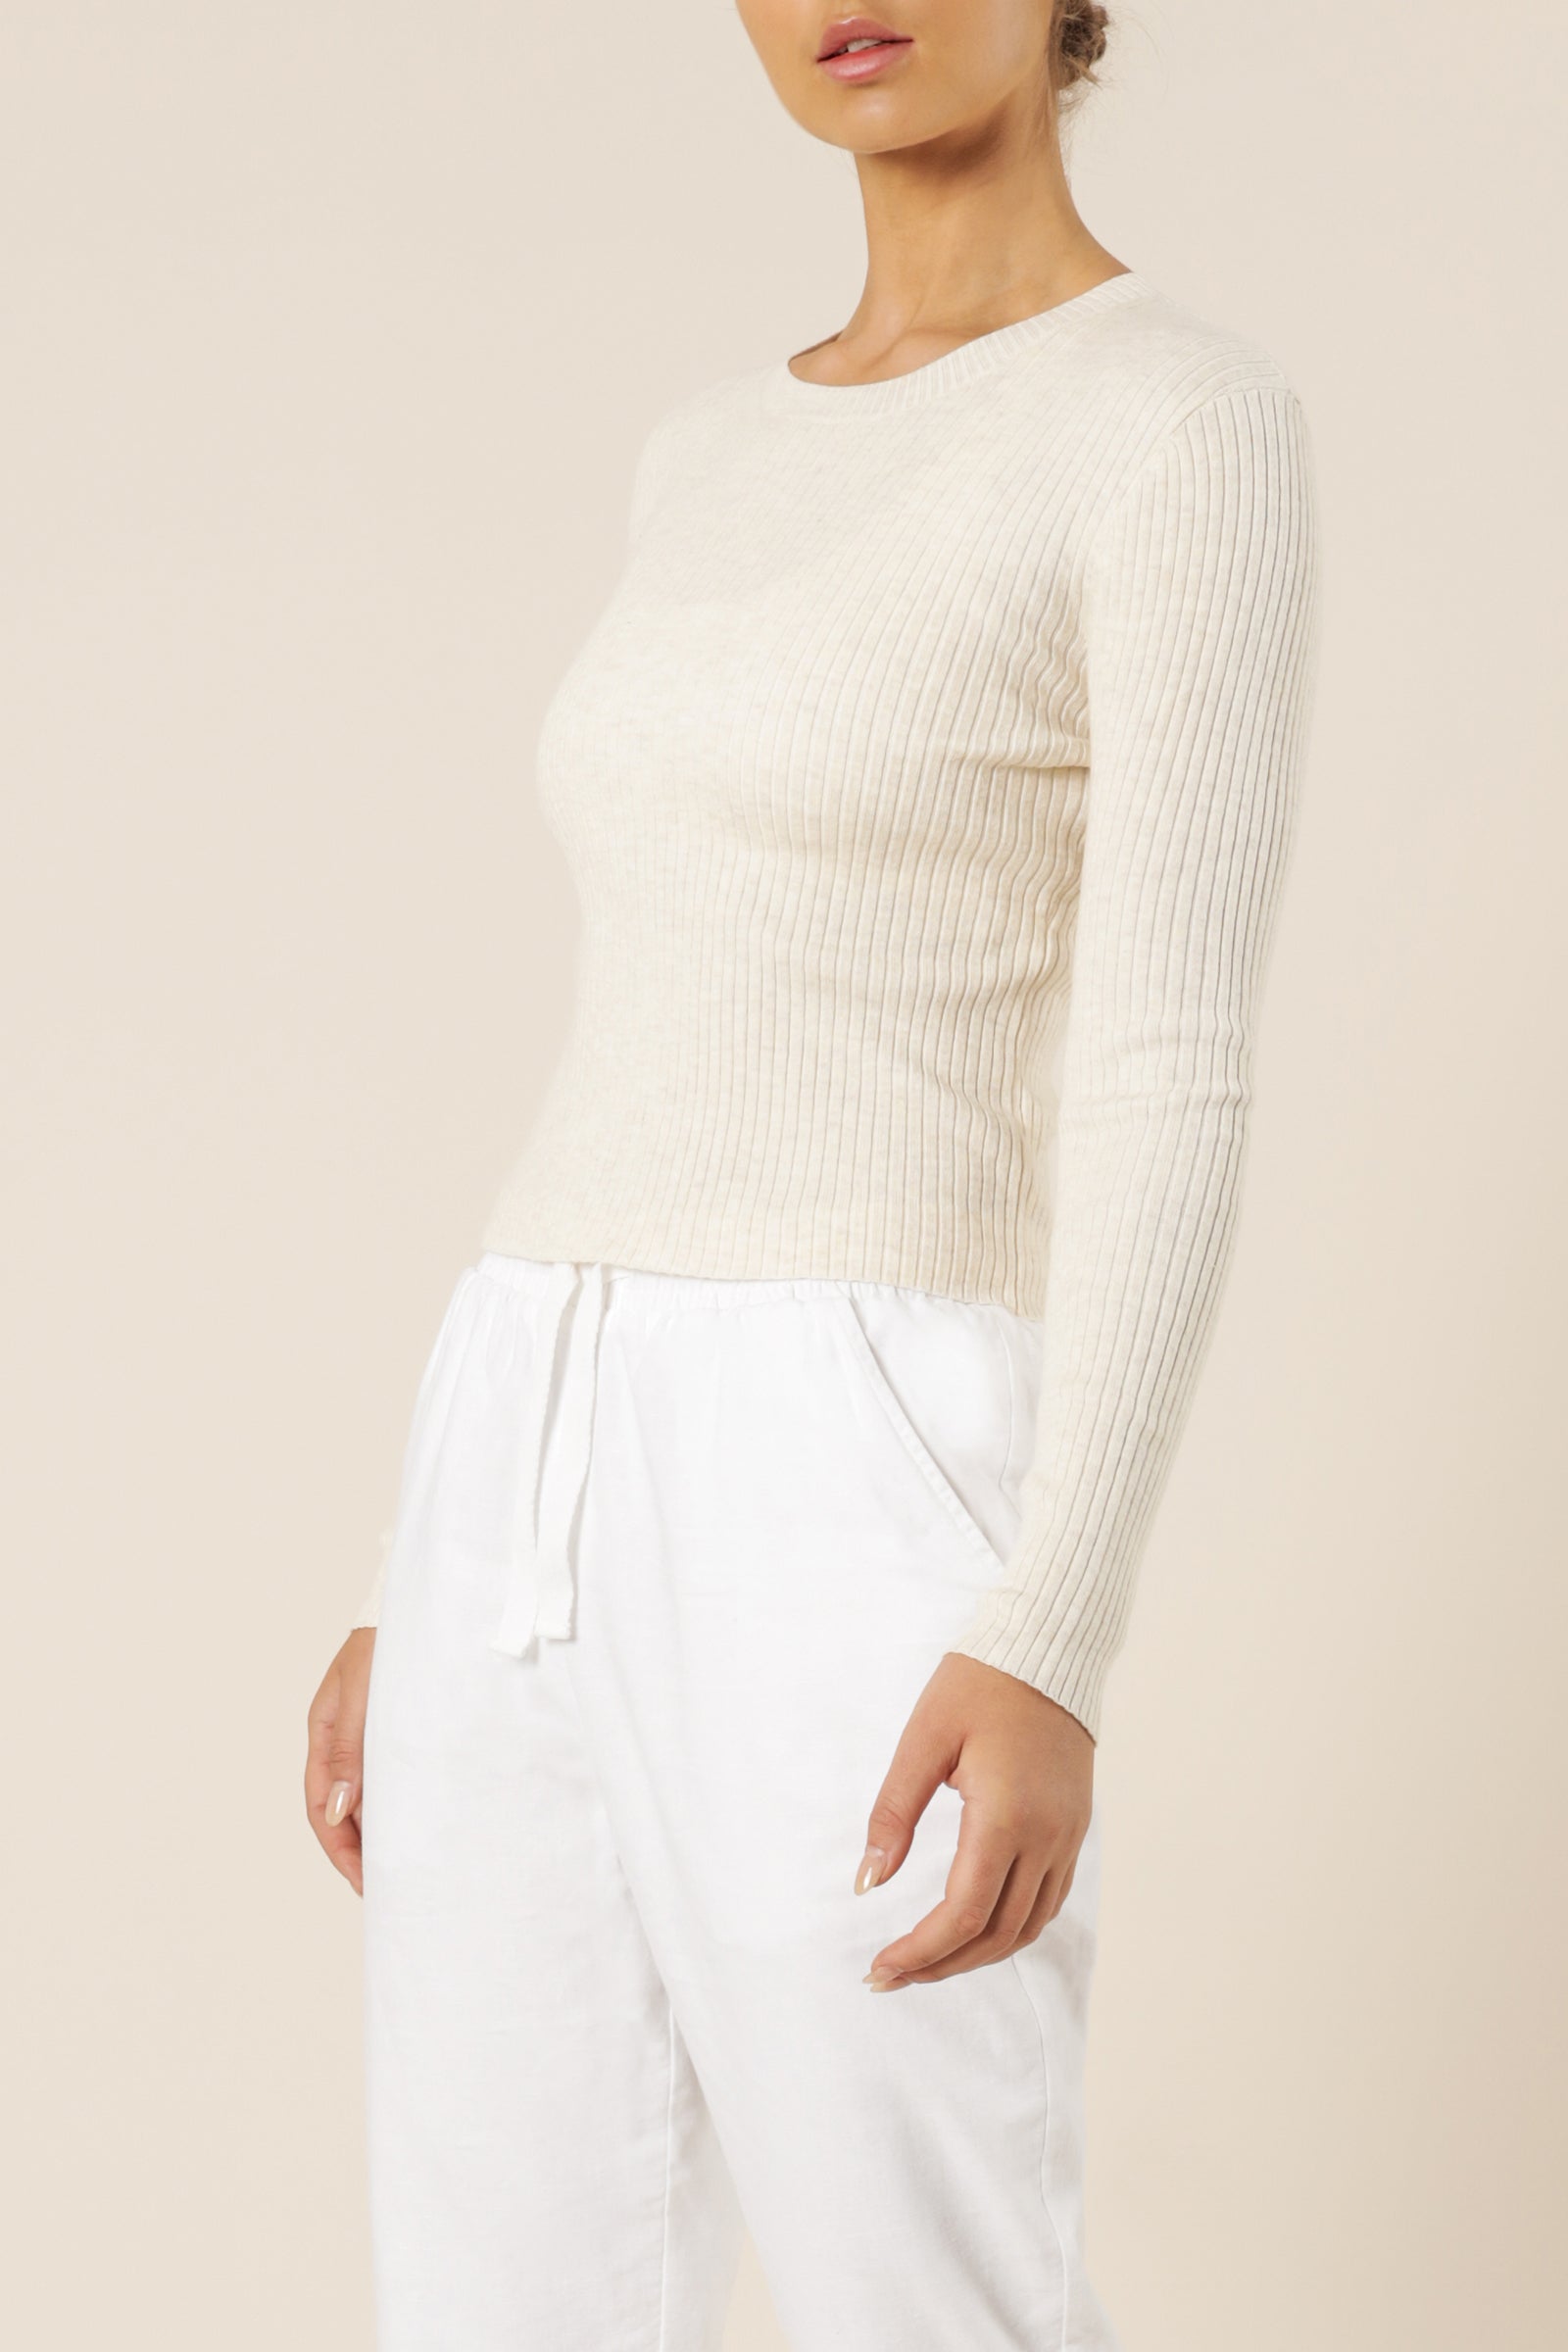 Nude Lucy Nude Classic Knit Snow Marle Knits 